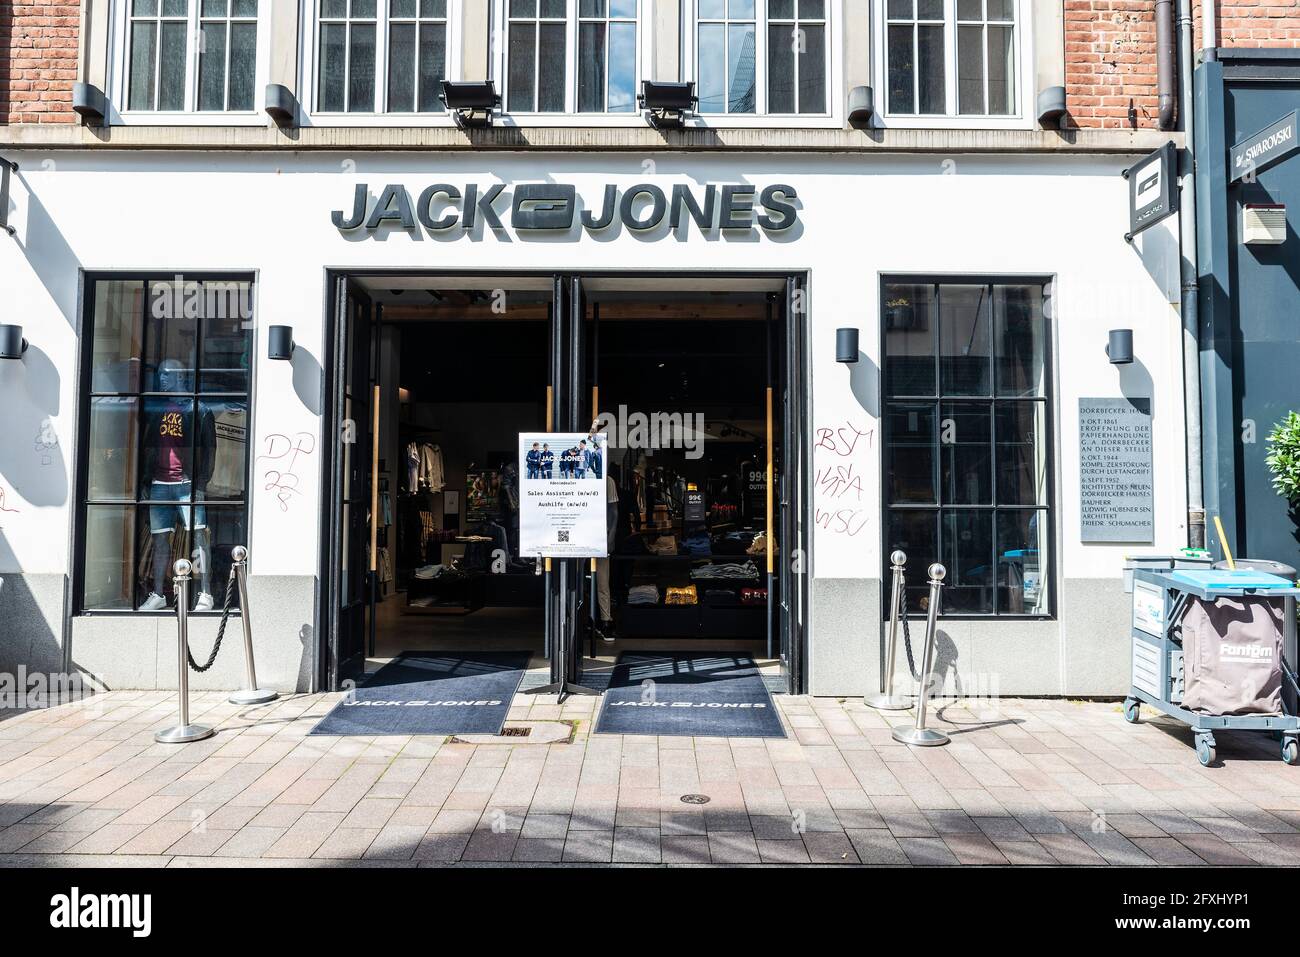 Bremen, Germany - August 19, 2019: Facade of a Jack Jones or Jack&Jones  clothing store in a shopping street of Bremen, Germany Stock Photo - Alamy